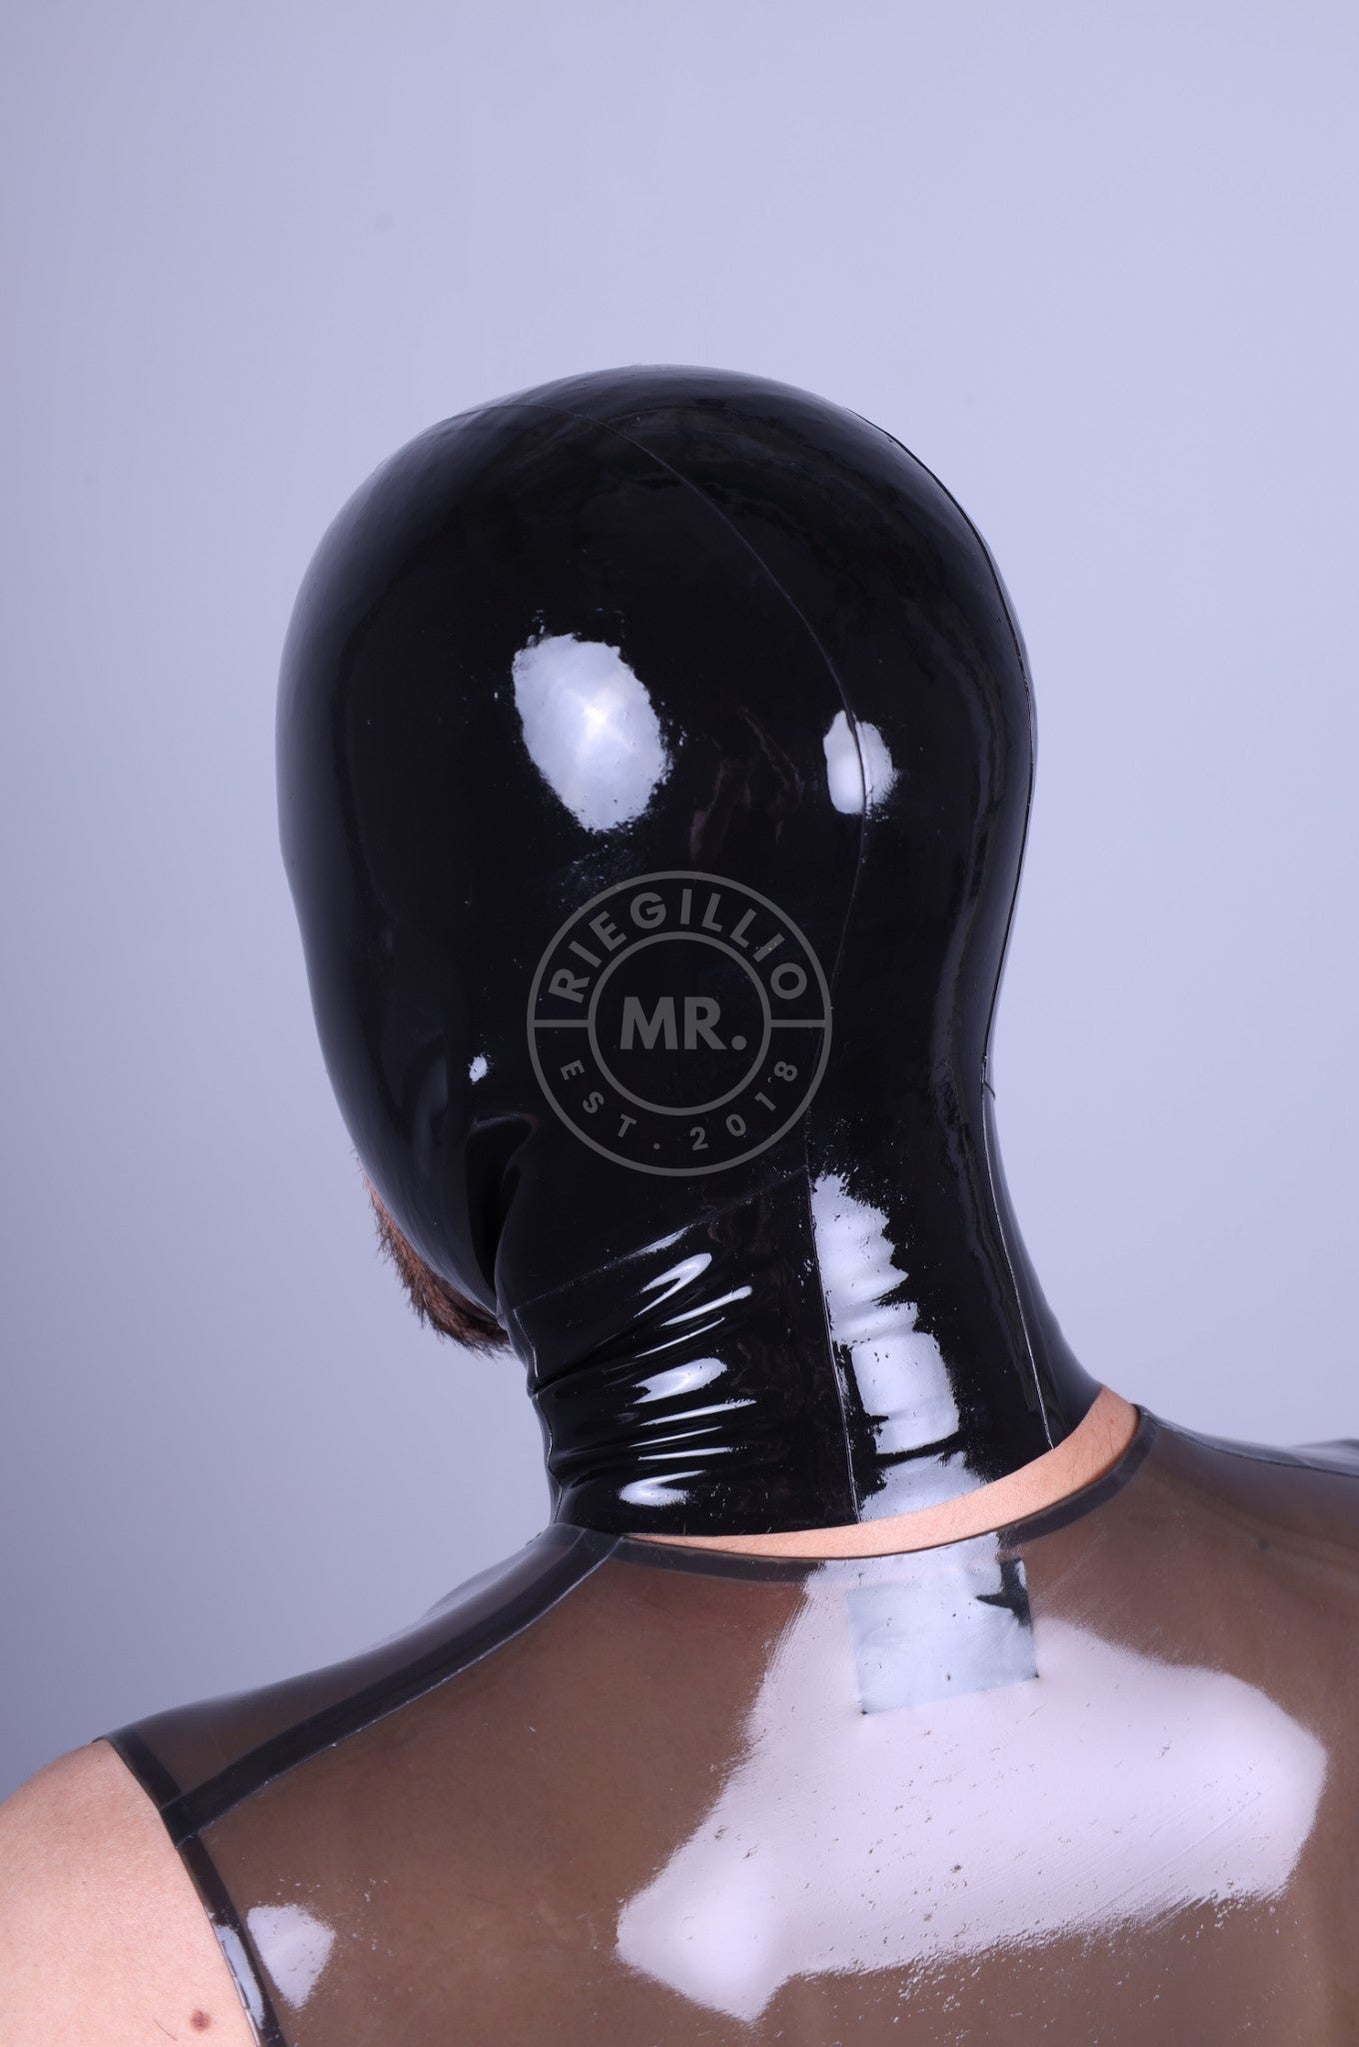 Rubber Micro Perforated Hood - Open Mouth at MR. Riegillio